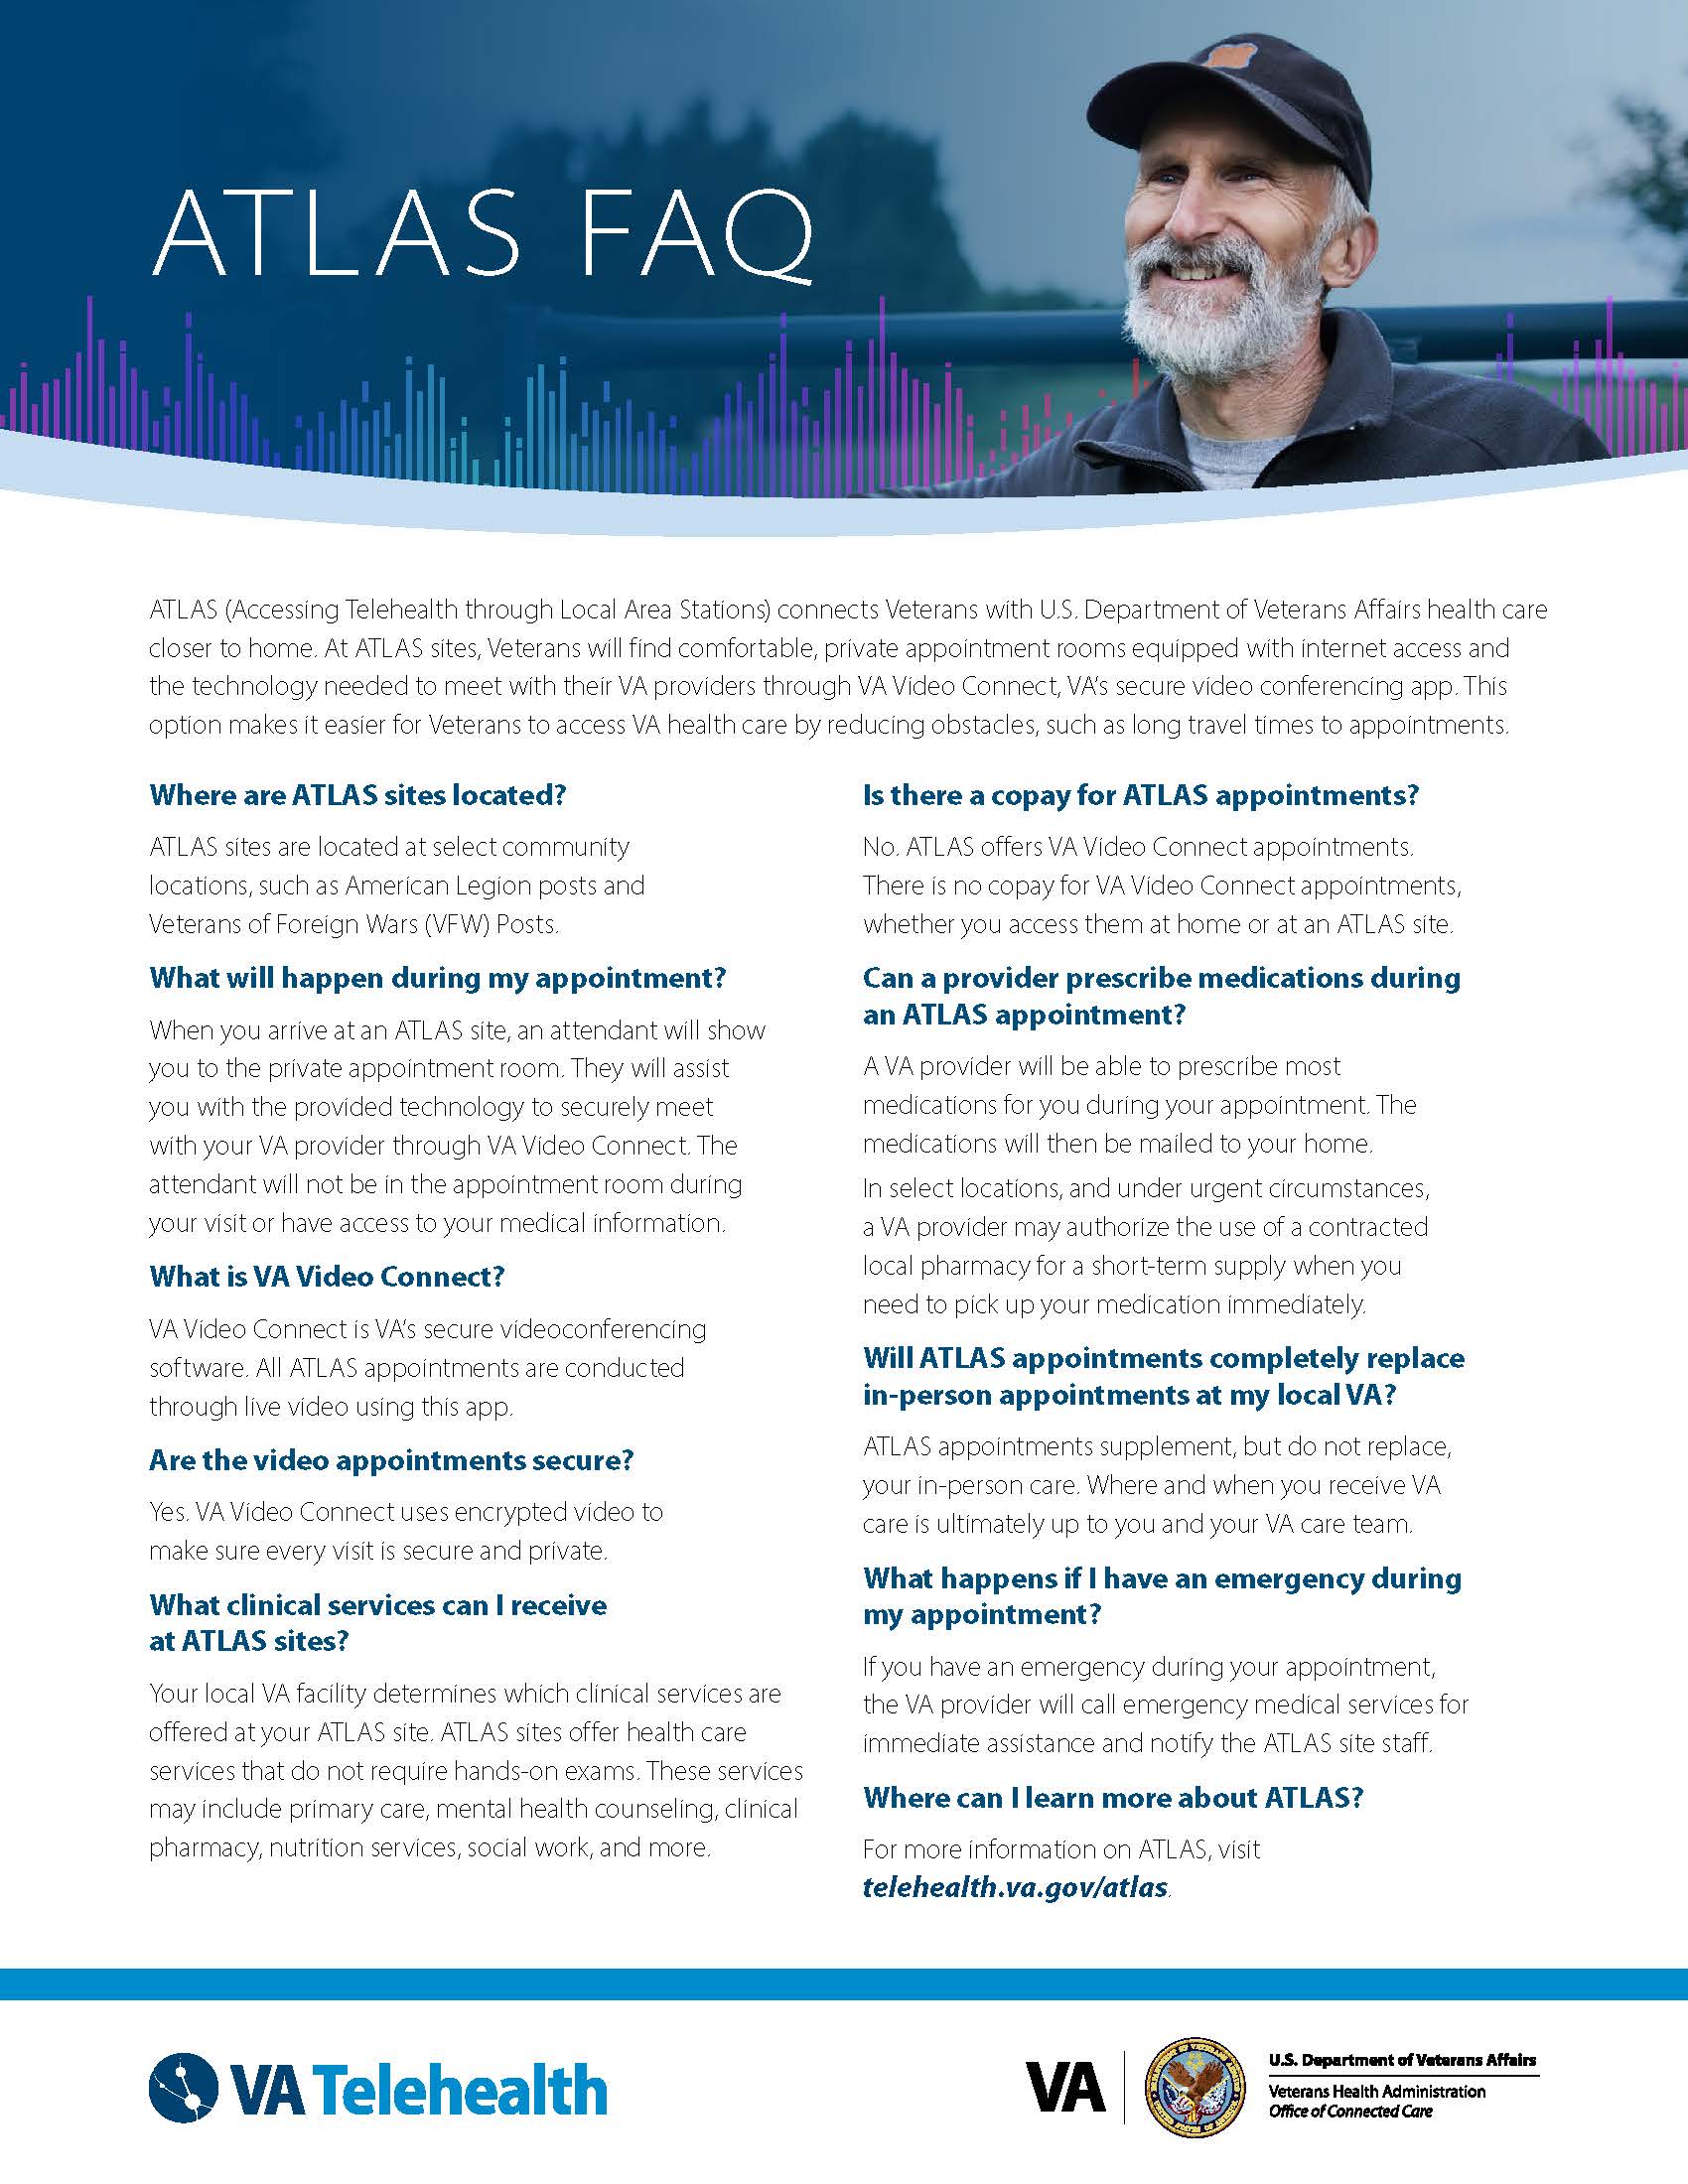 Thumbnail of the ATLAS Frequently Asked Questions Flyer